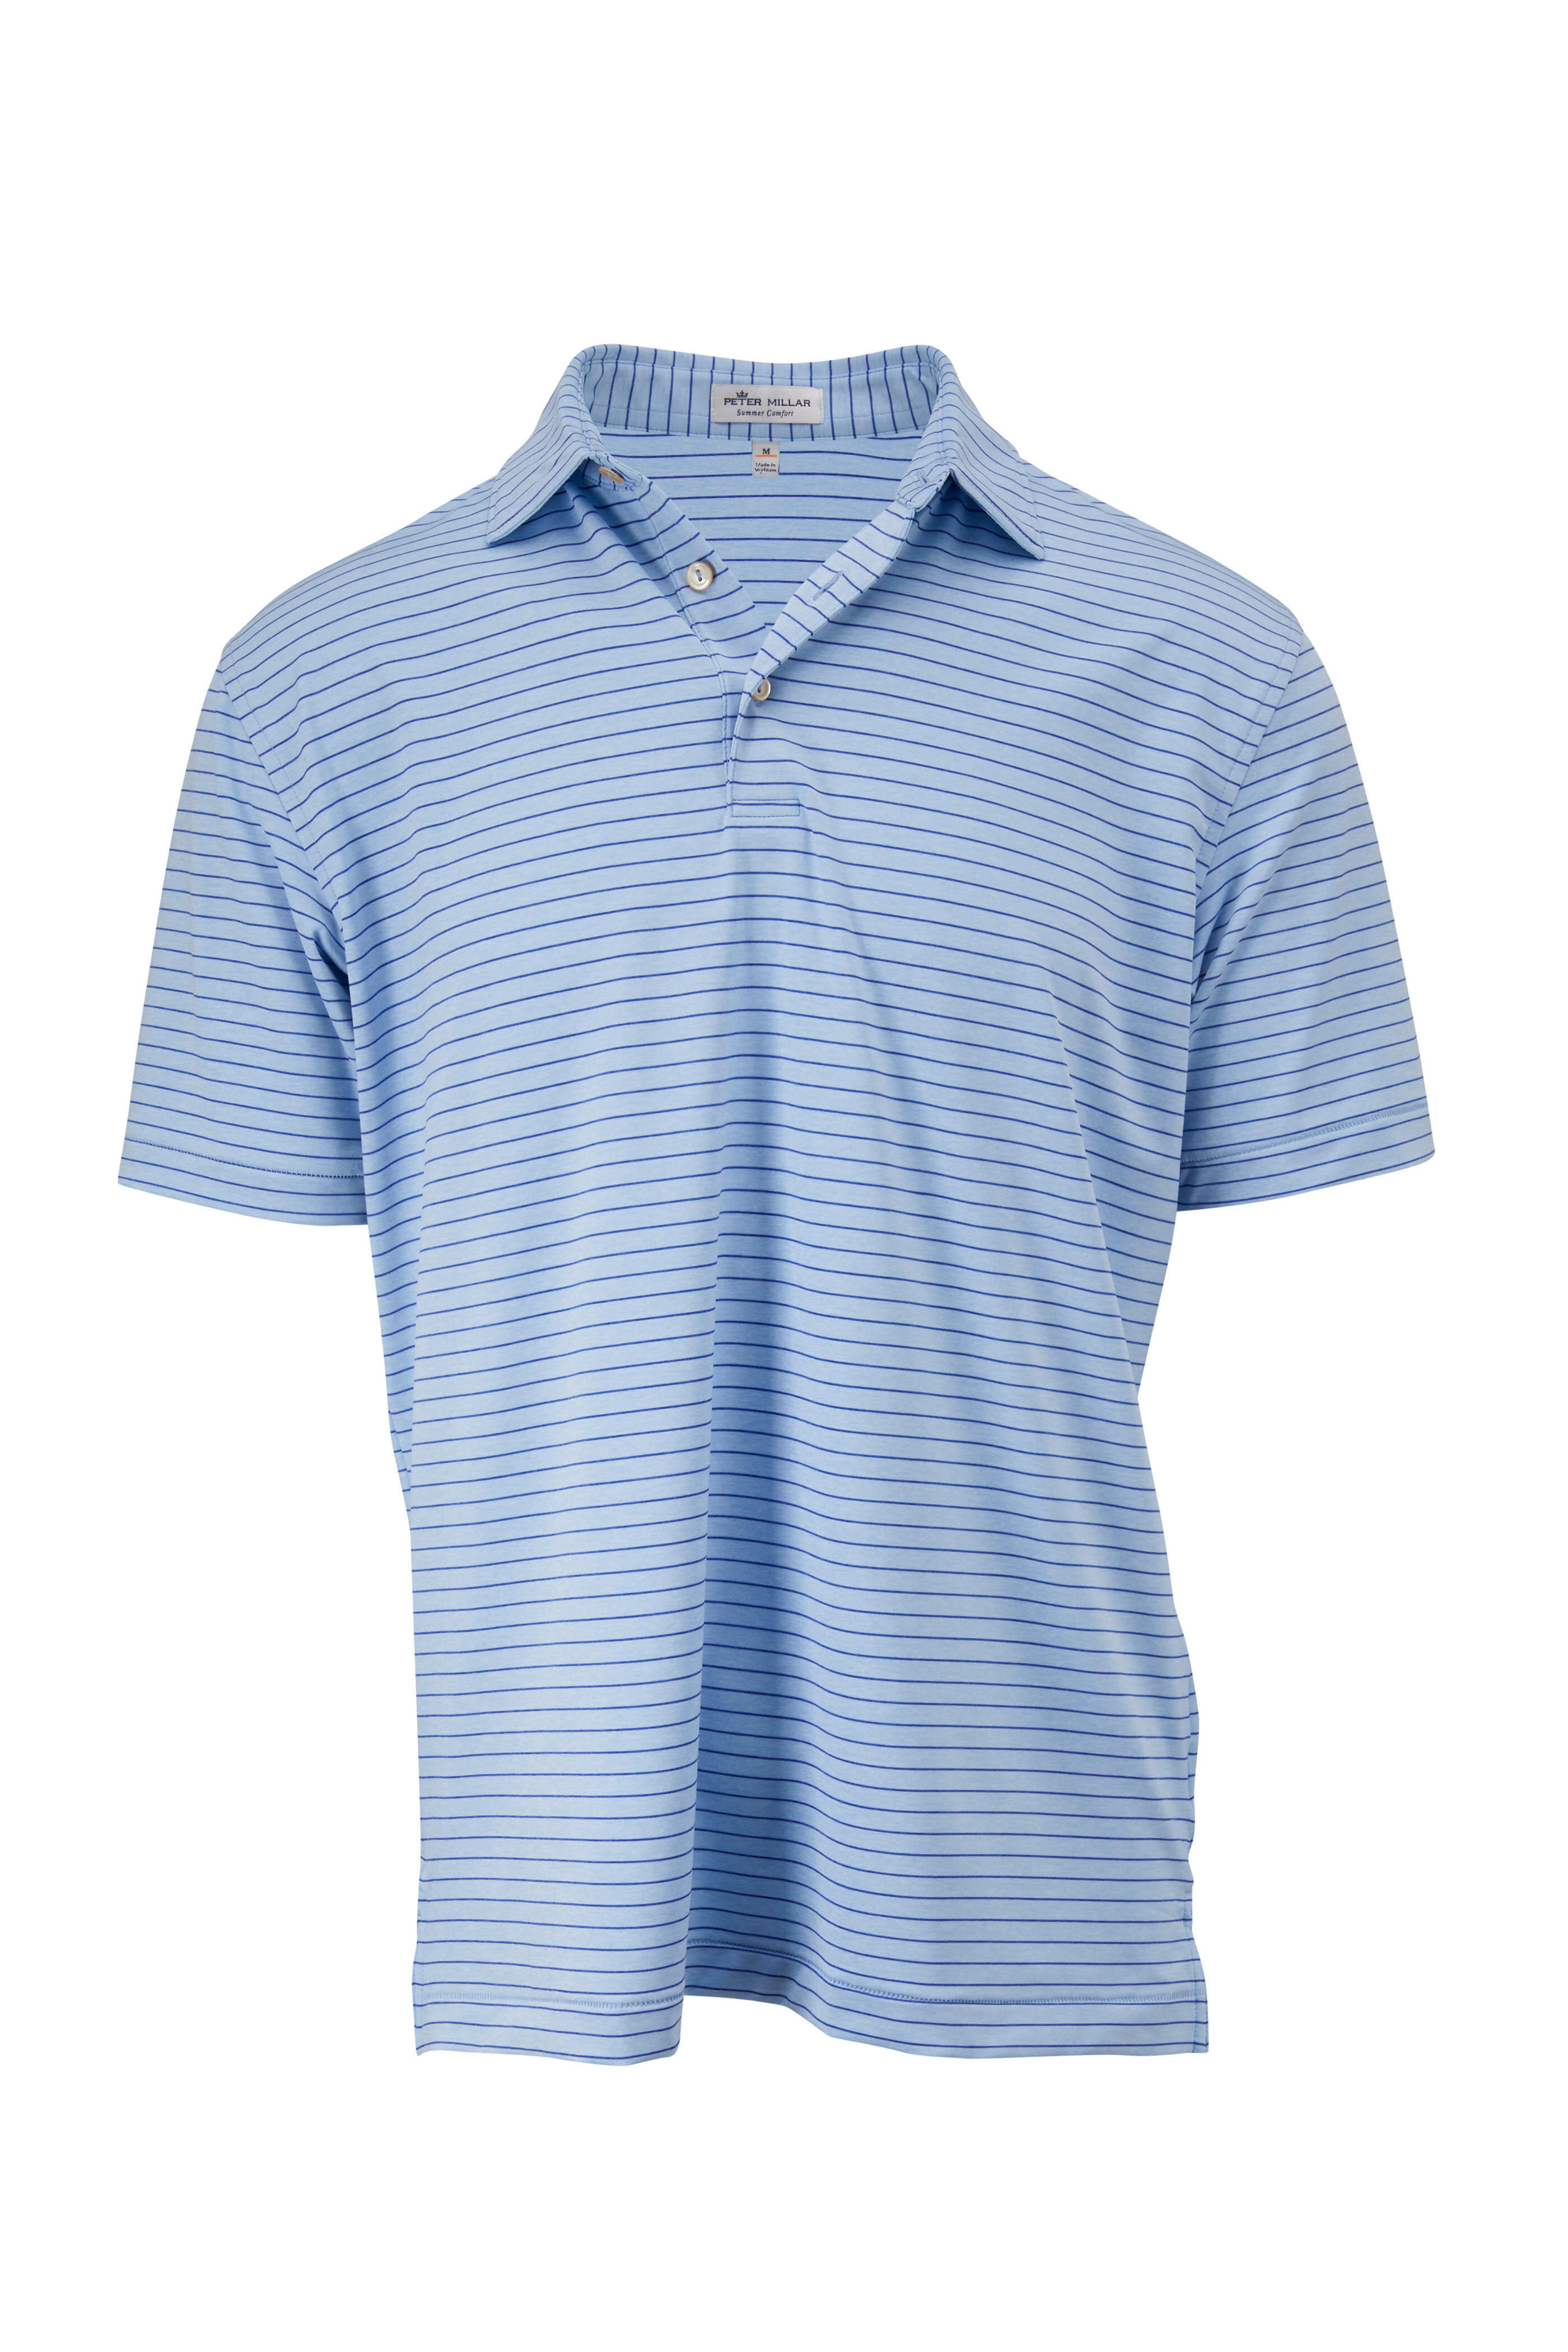 Peter Millar - Crafty Cottage Blue Performance Polo